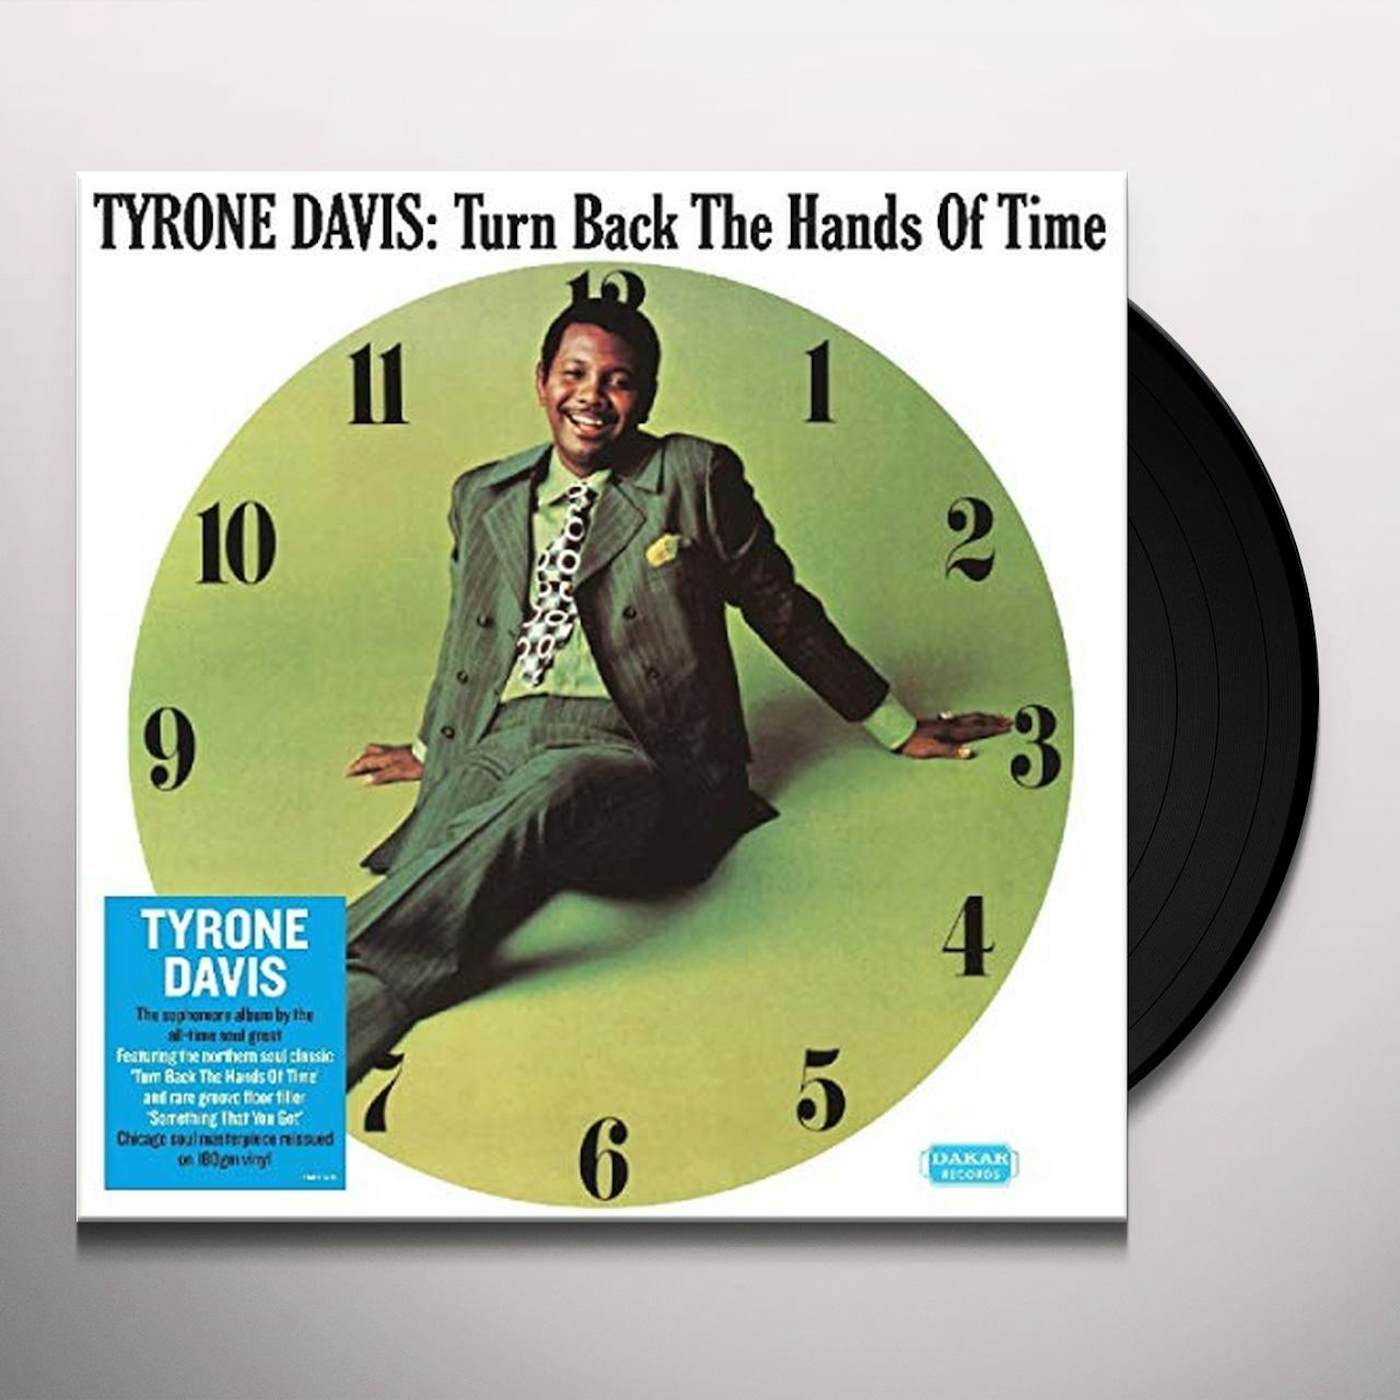 Turn Back the Hands of Time by Tyrone Davis (Album, Chicago Soul